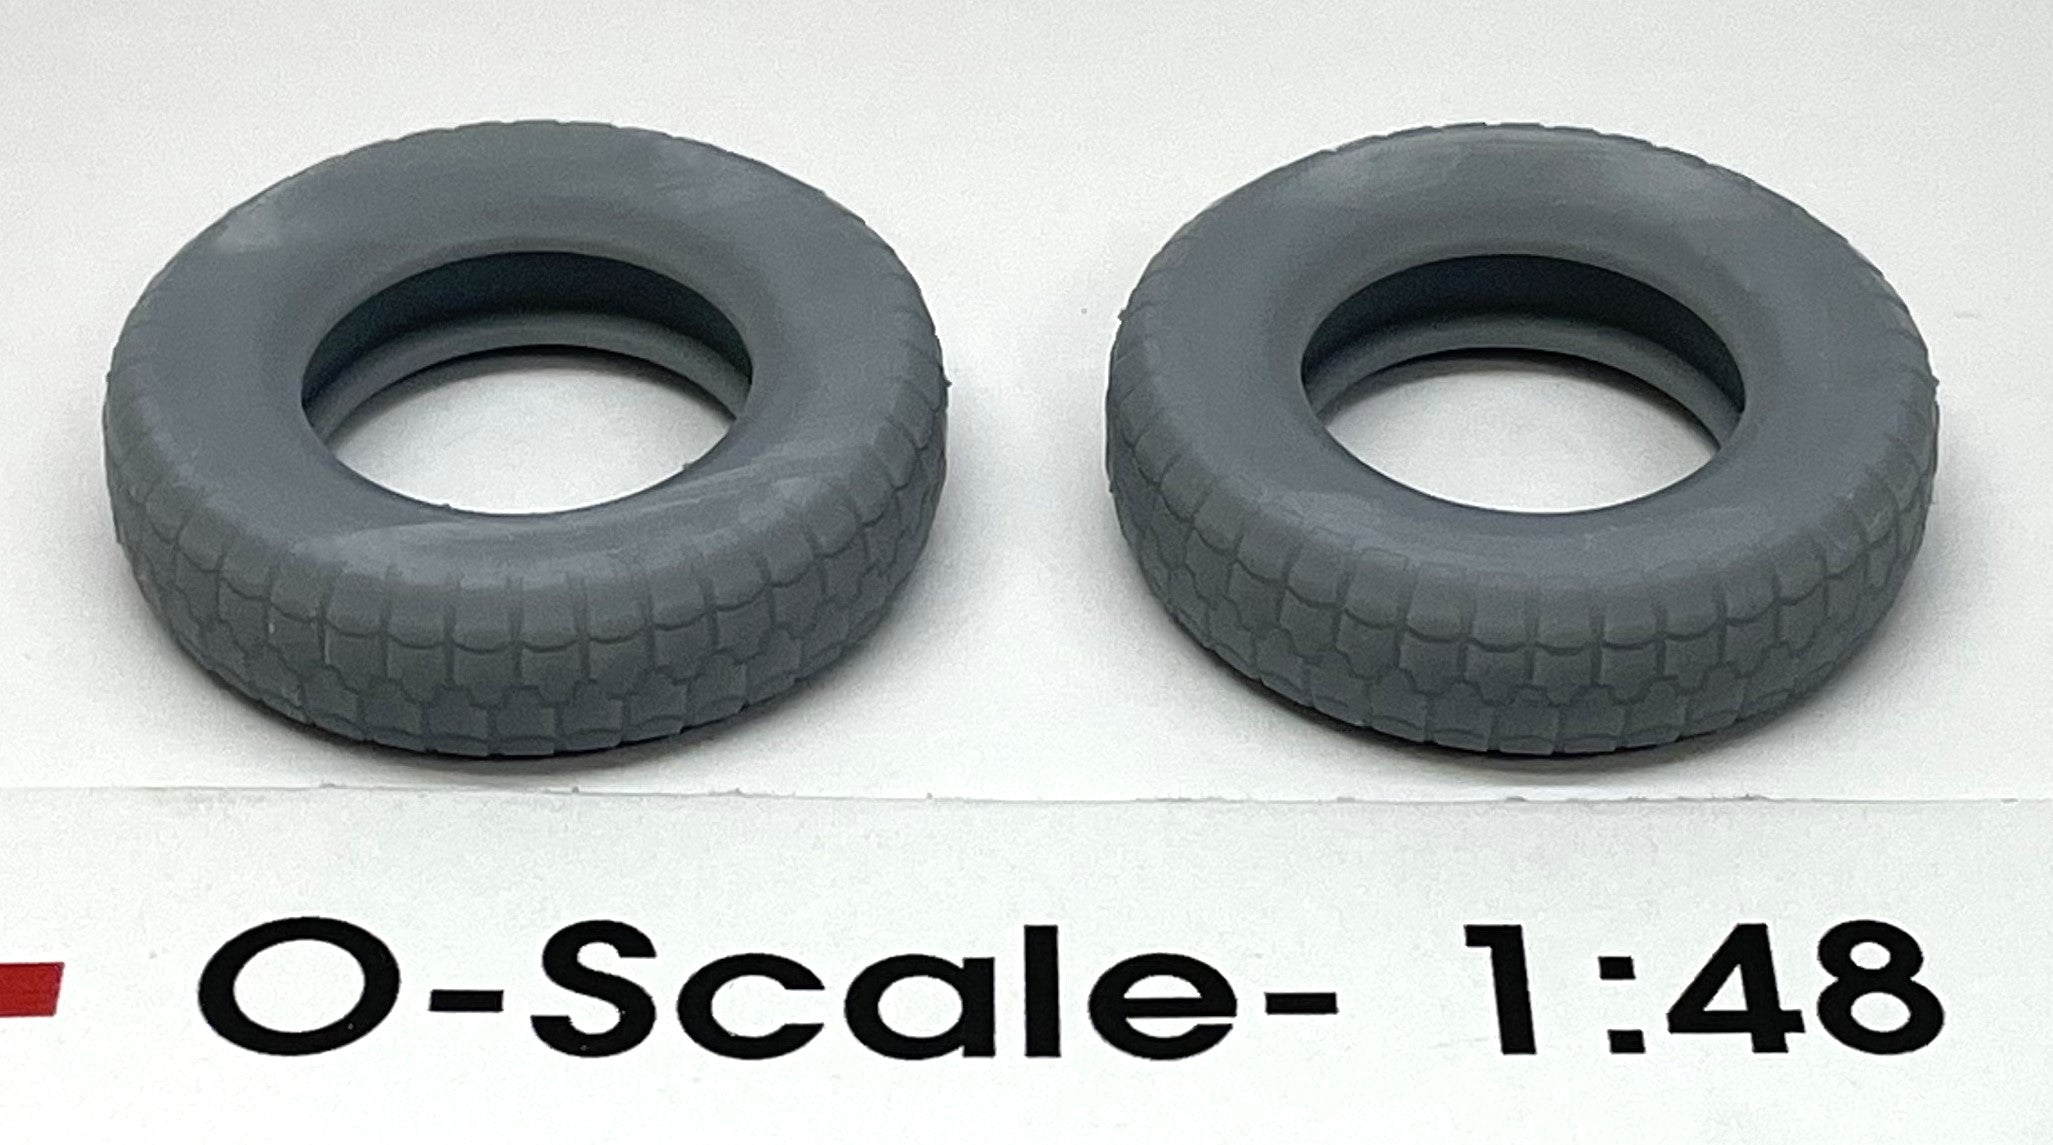 PPM-33541 - Tires- Individual (2)